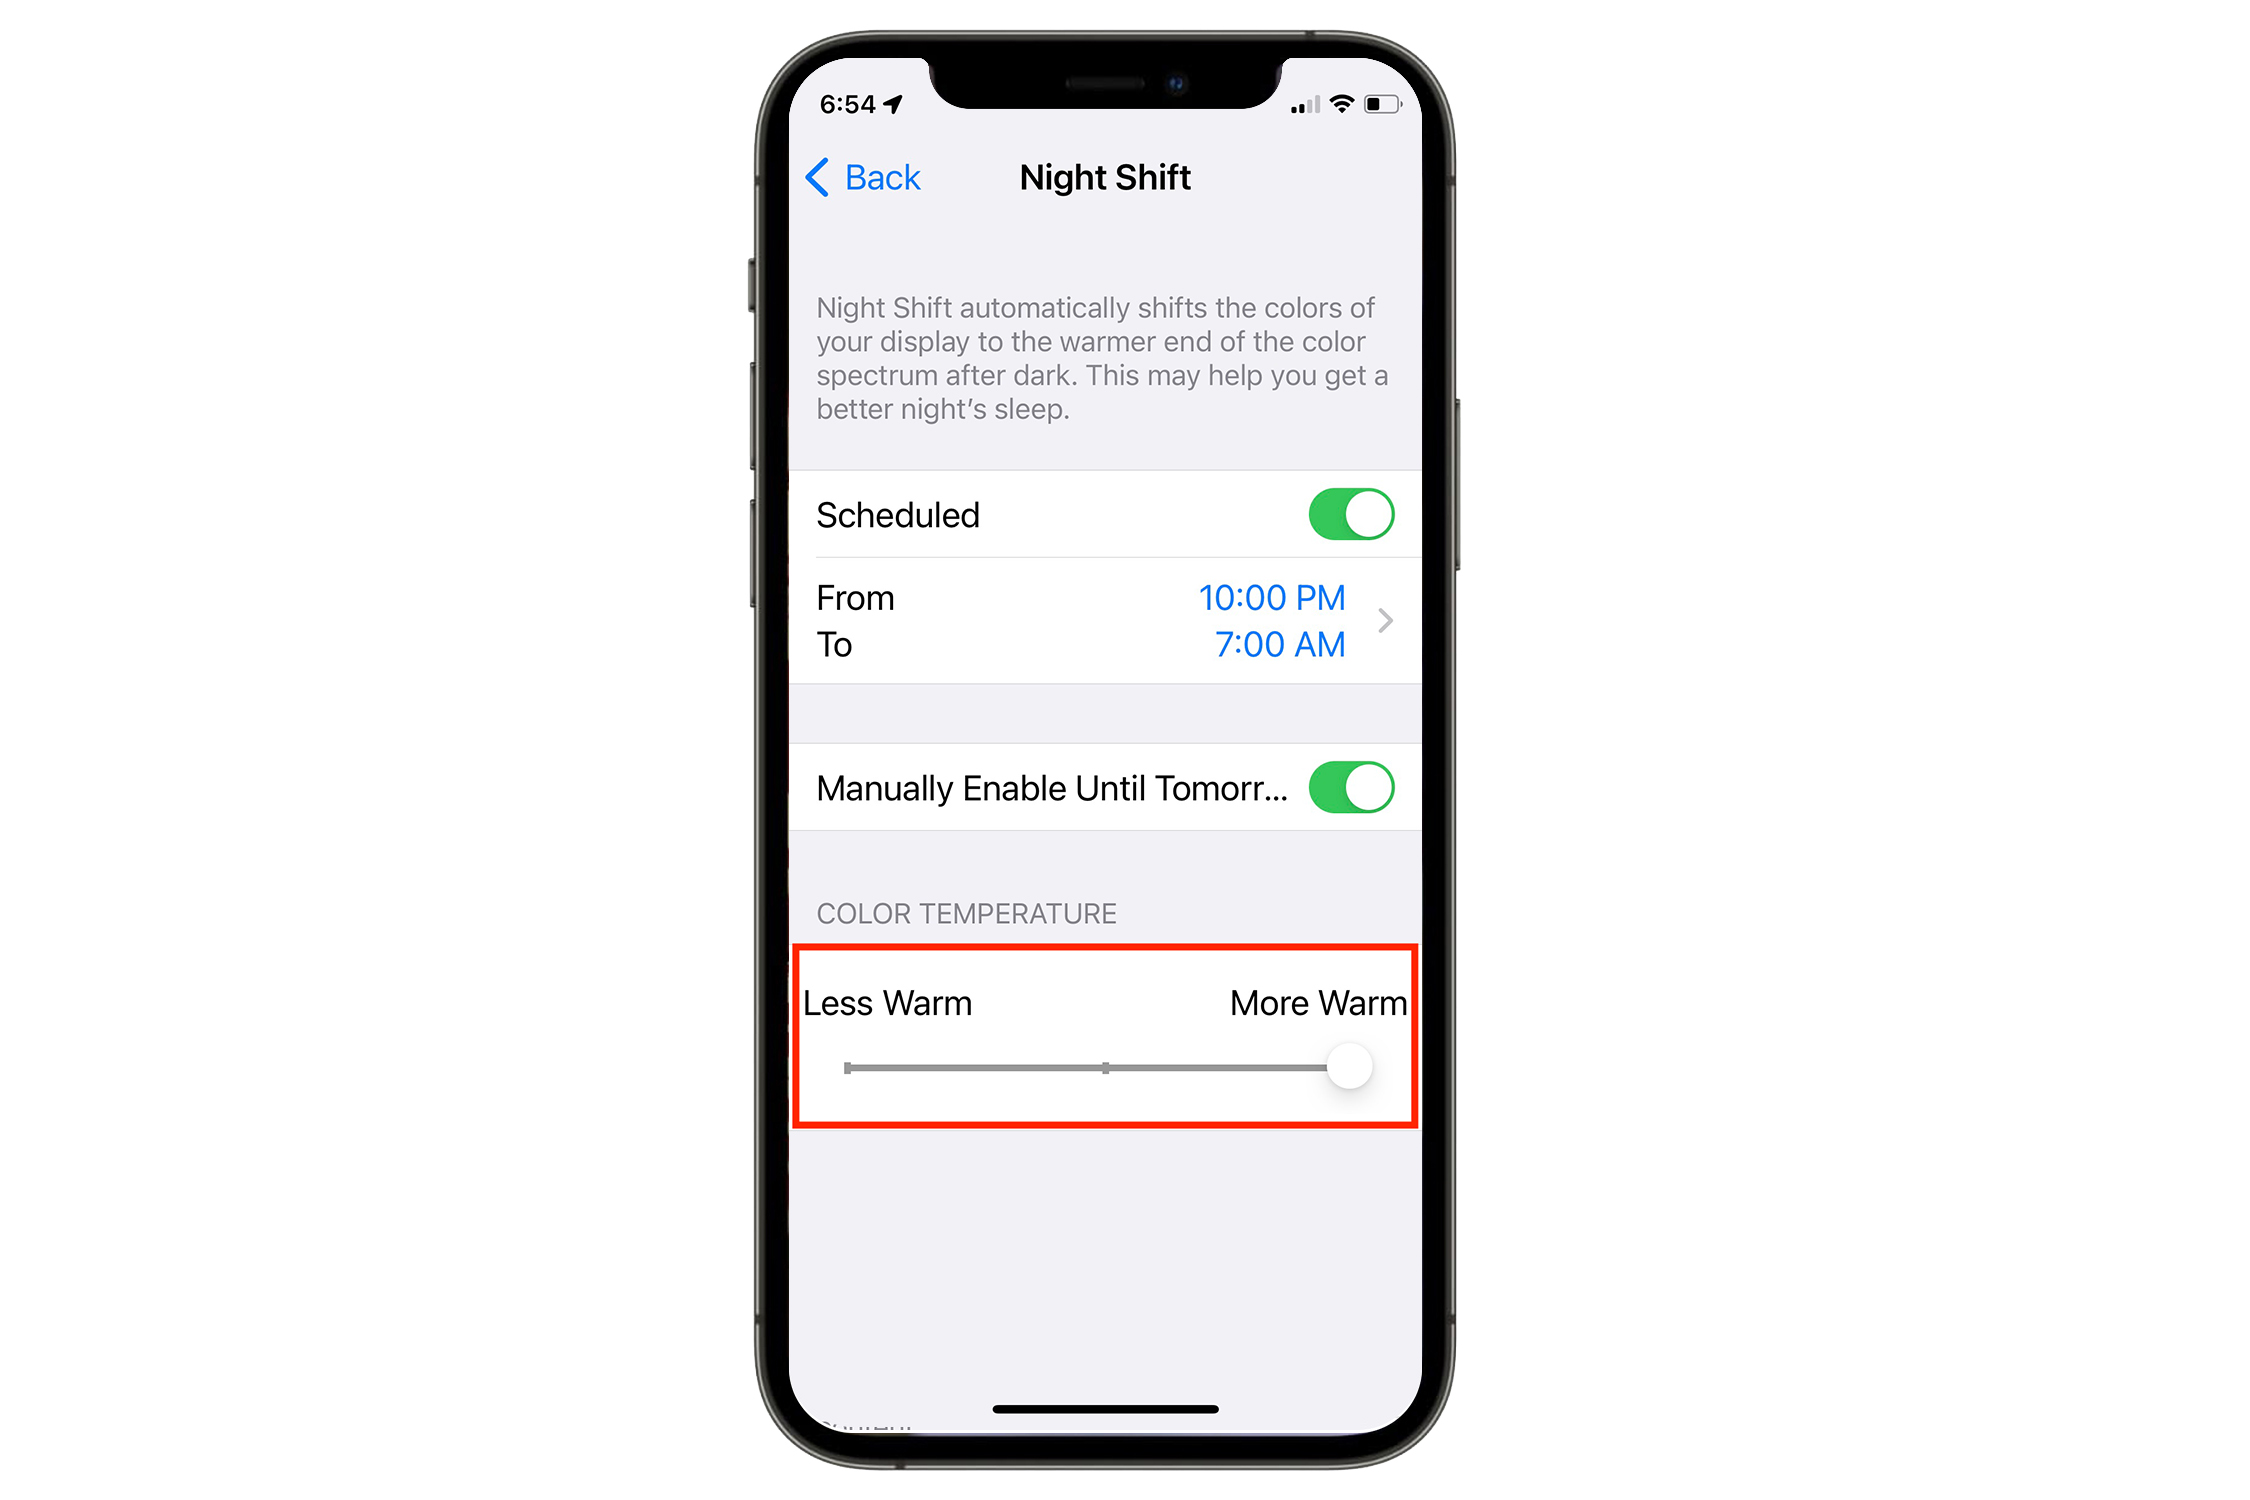 How to turn off blue light on iPhone using Night Shift